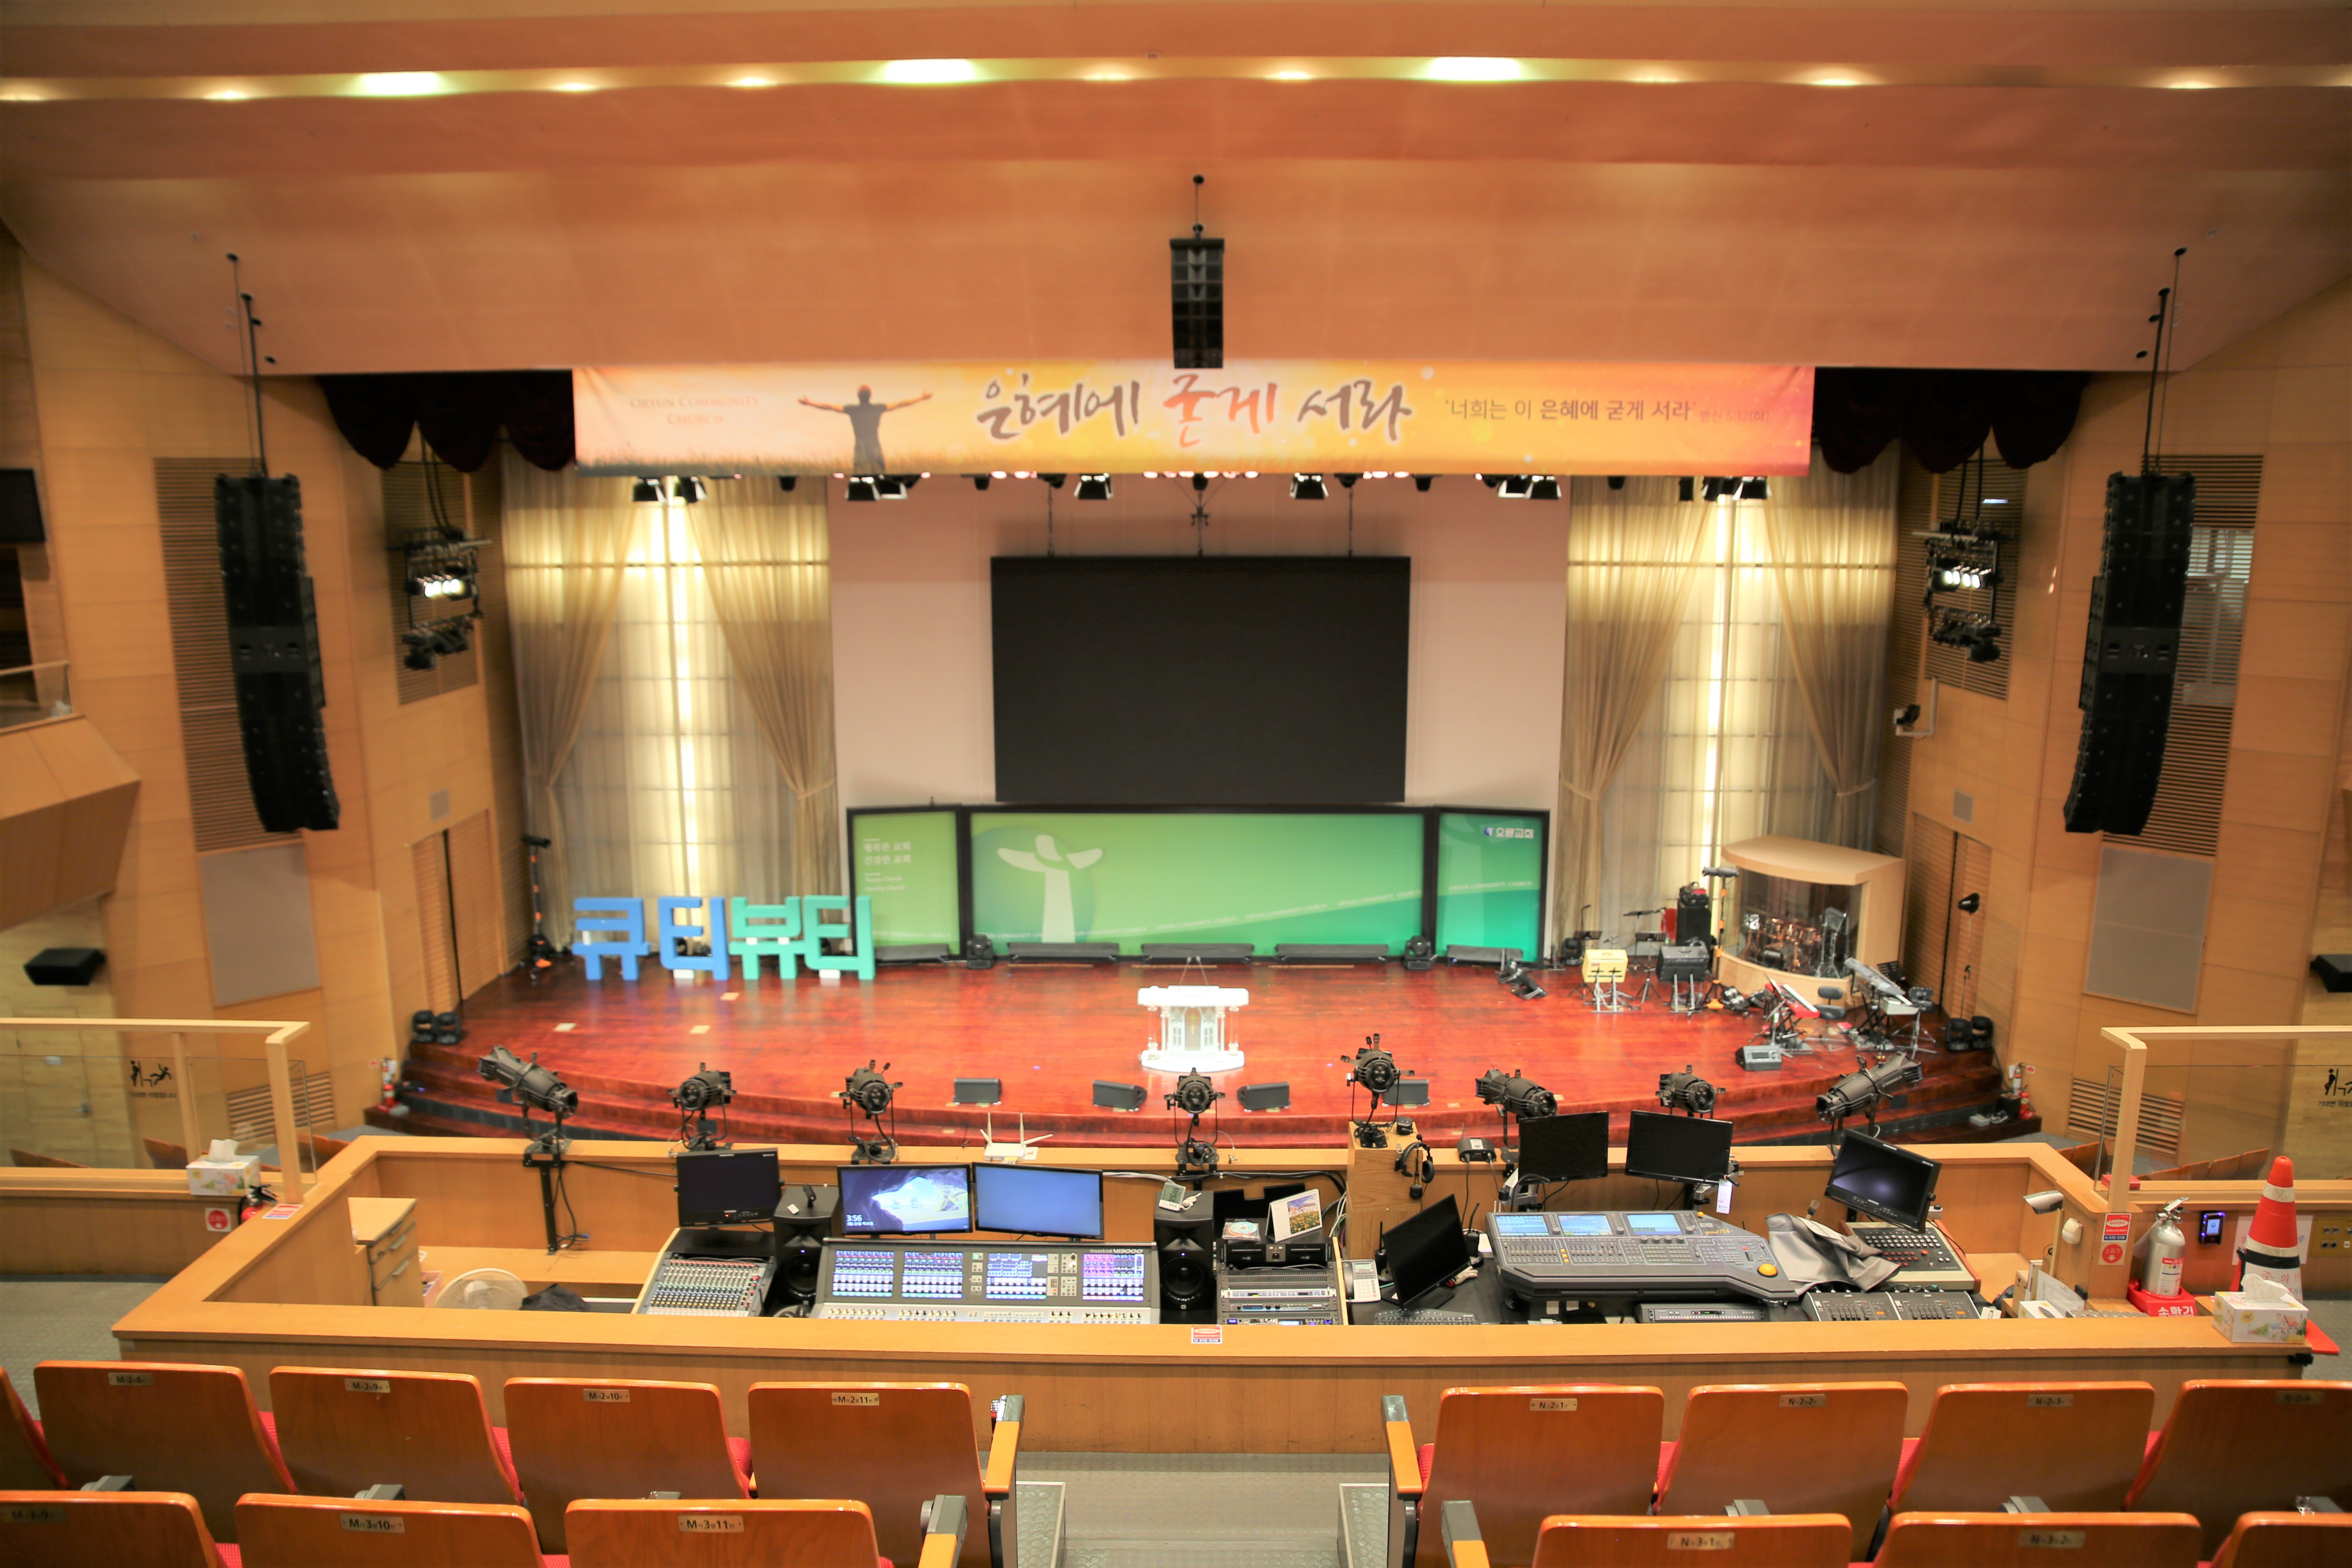 Oryun Community Church Delivers Their Message Loud and Clear with HARMAN Professional Solutions